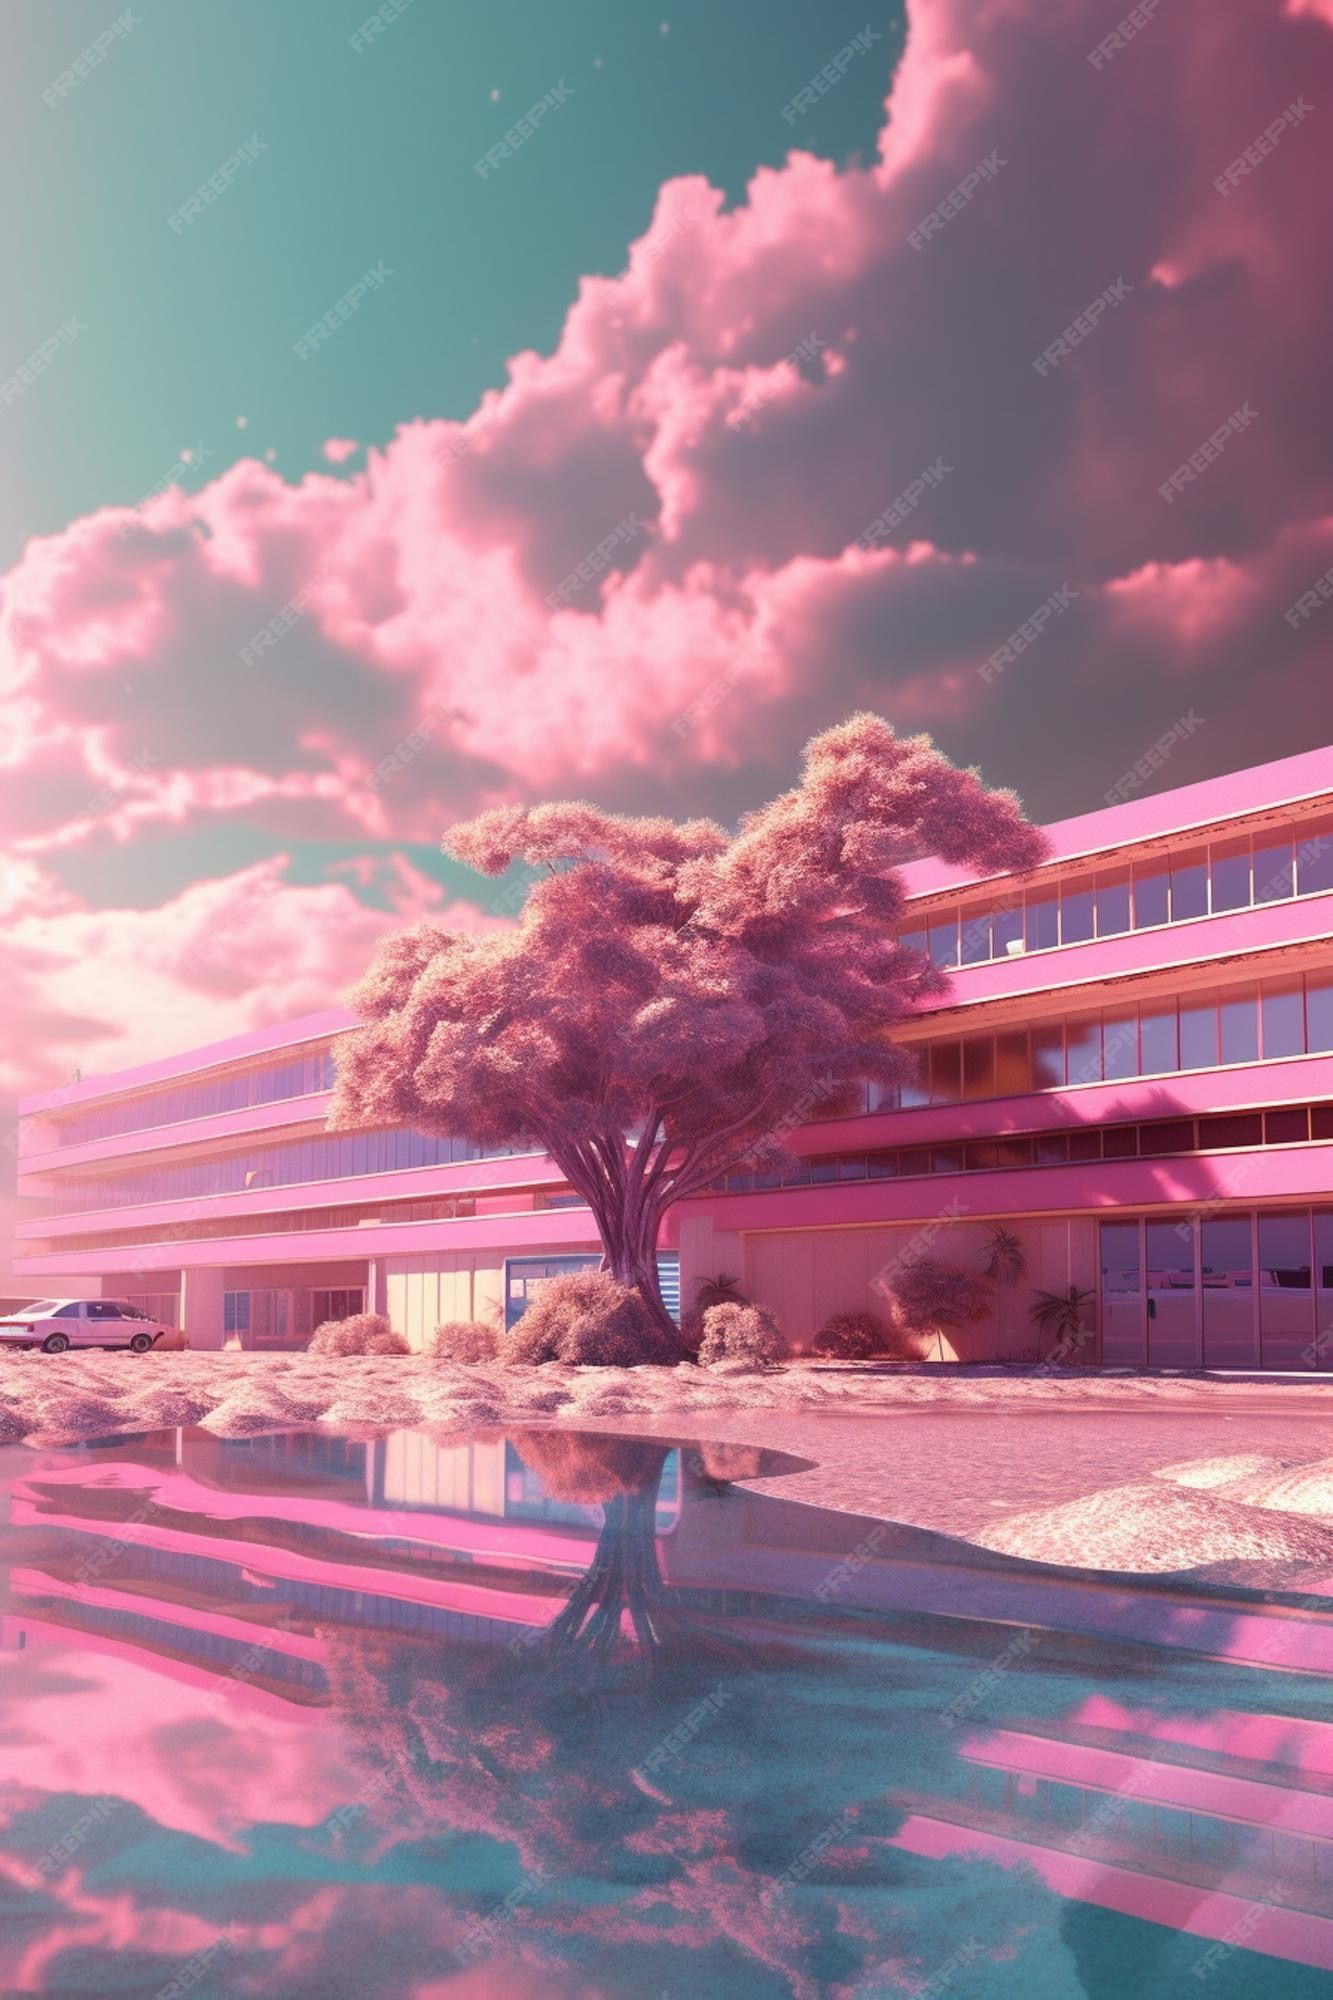 A pink tree in front of a pink building - Pink anime